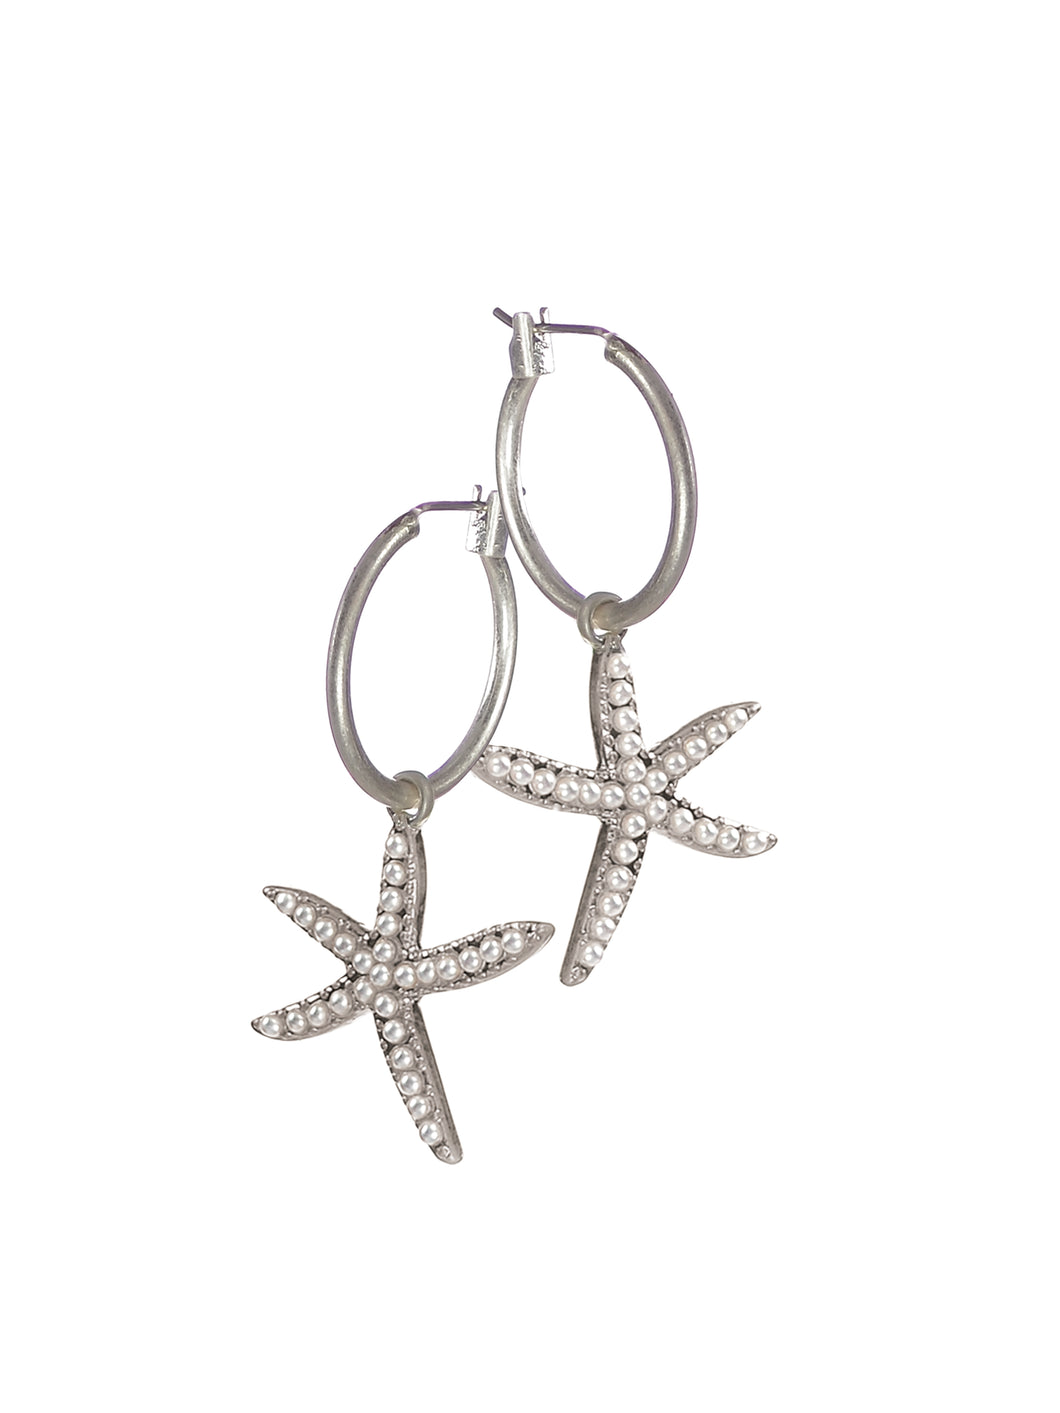 Hot Tomato Starry Starfish Earrings Set W/Tiny Pearls - Worn Silver